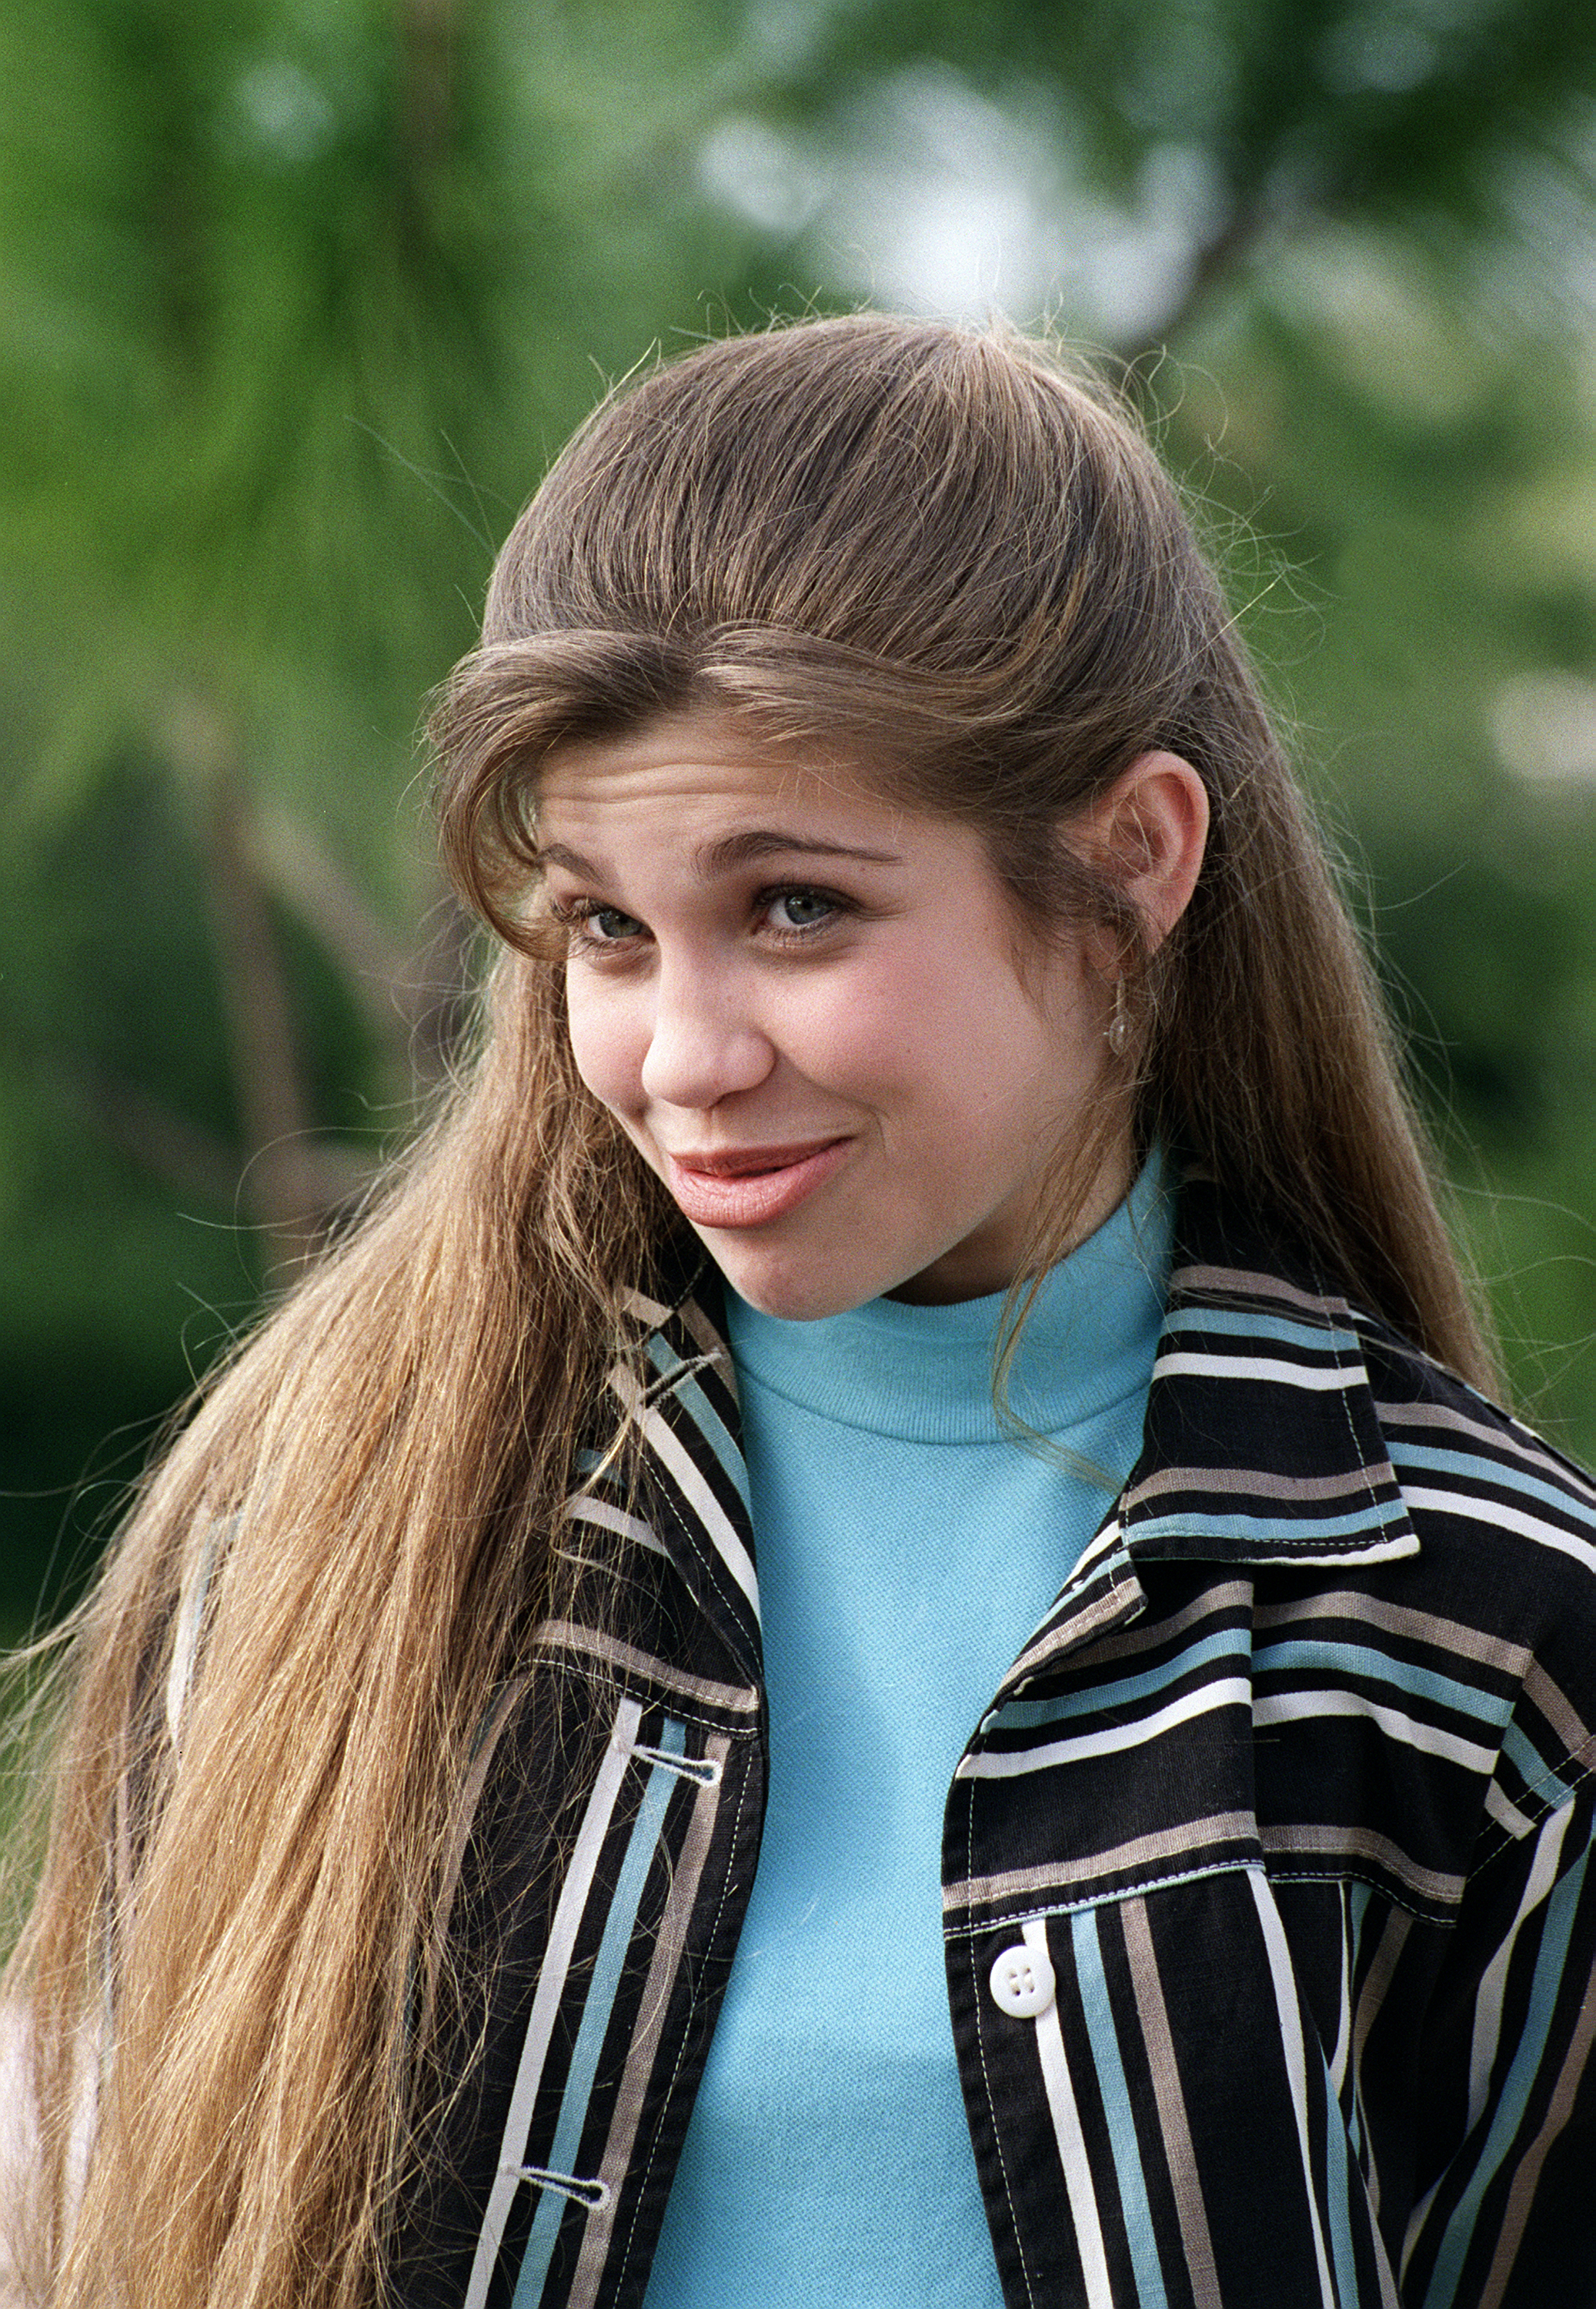 Danielle Fishel on "Boy Meets World" episode "The Happiest Show On Earth" aired May 10, 1996. | Source: Getty Images